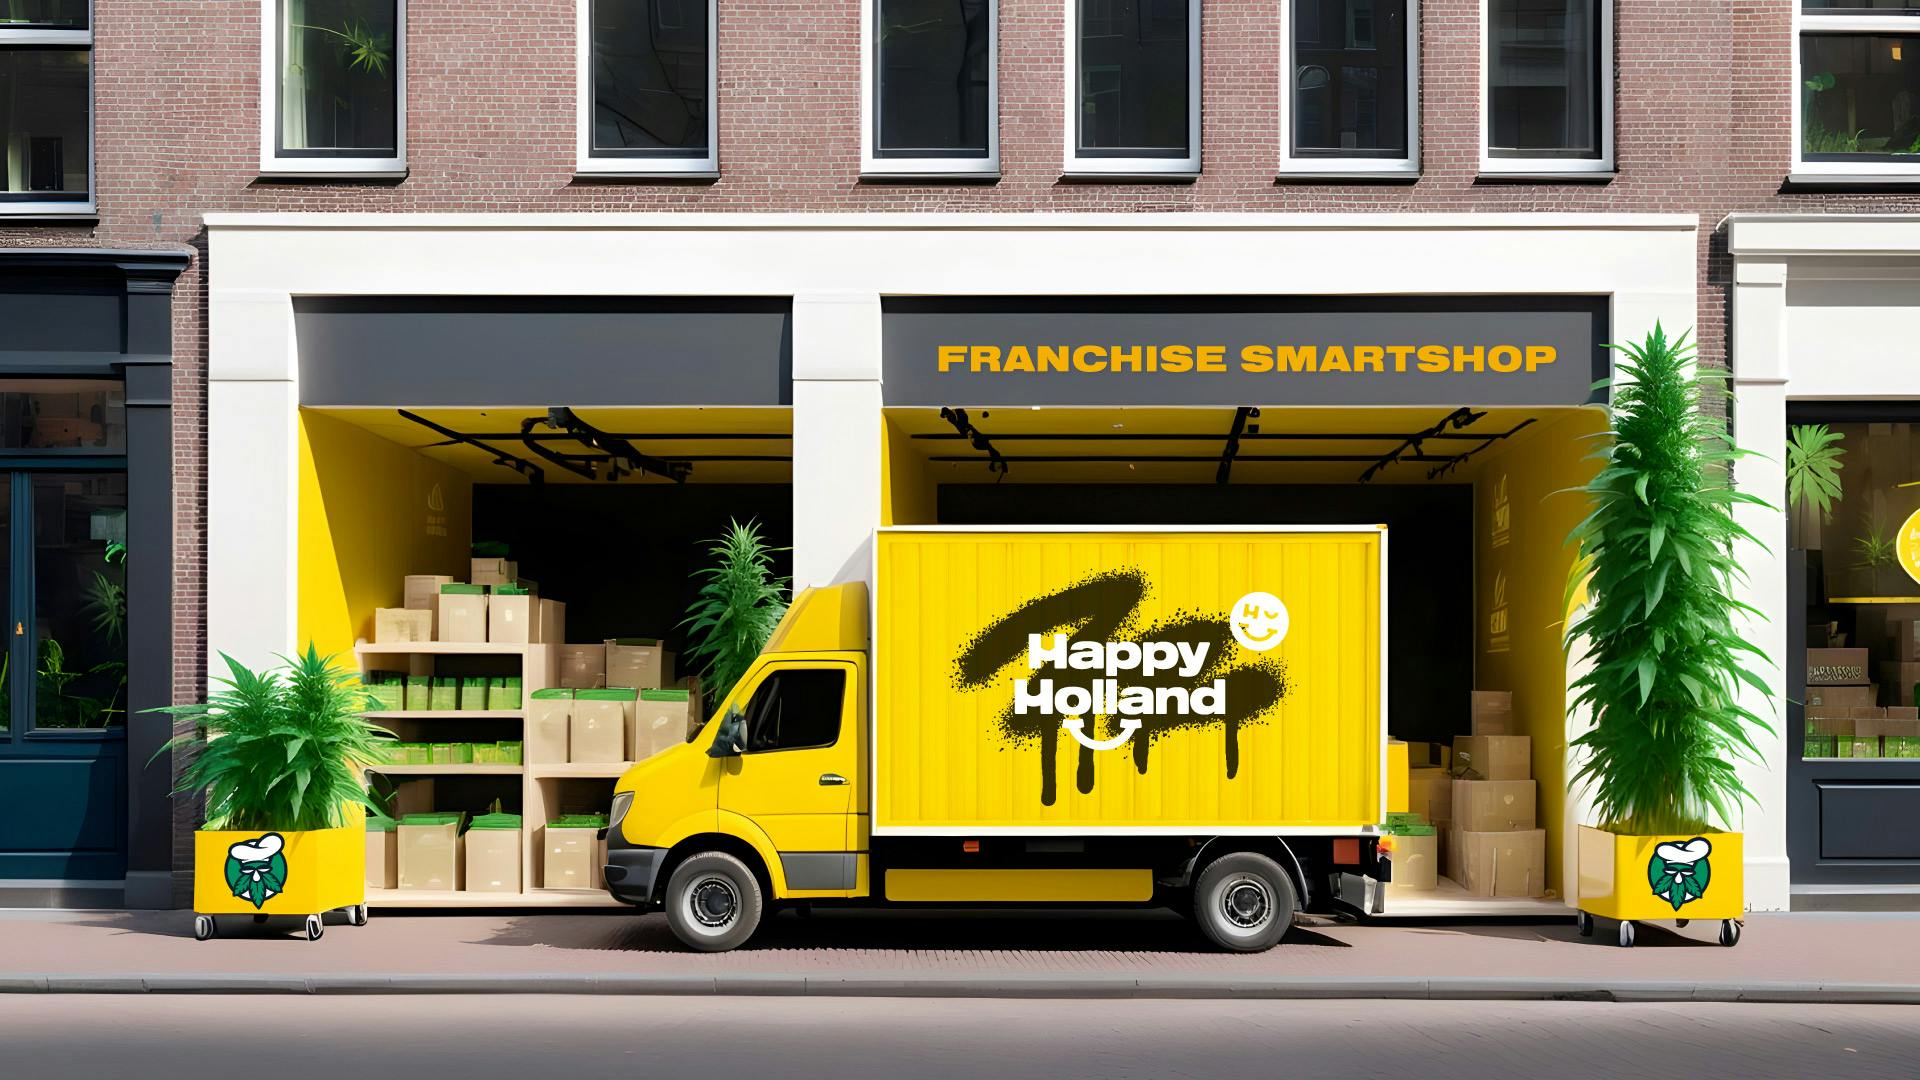 Franchising a Smartshop - How to?